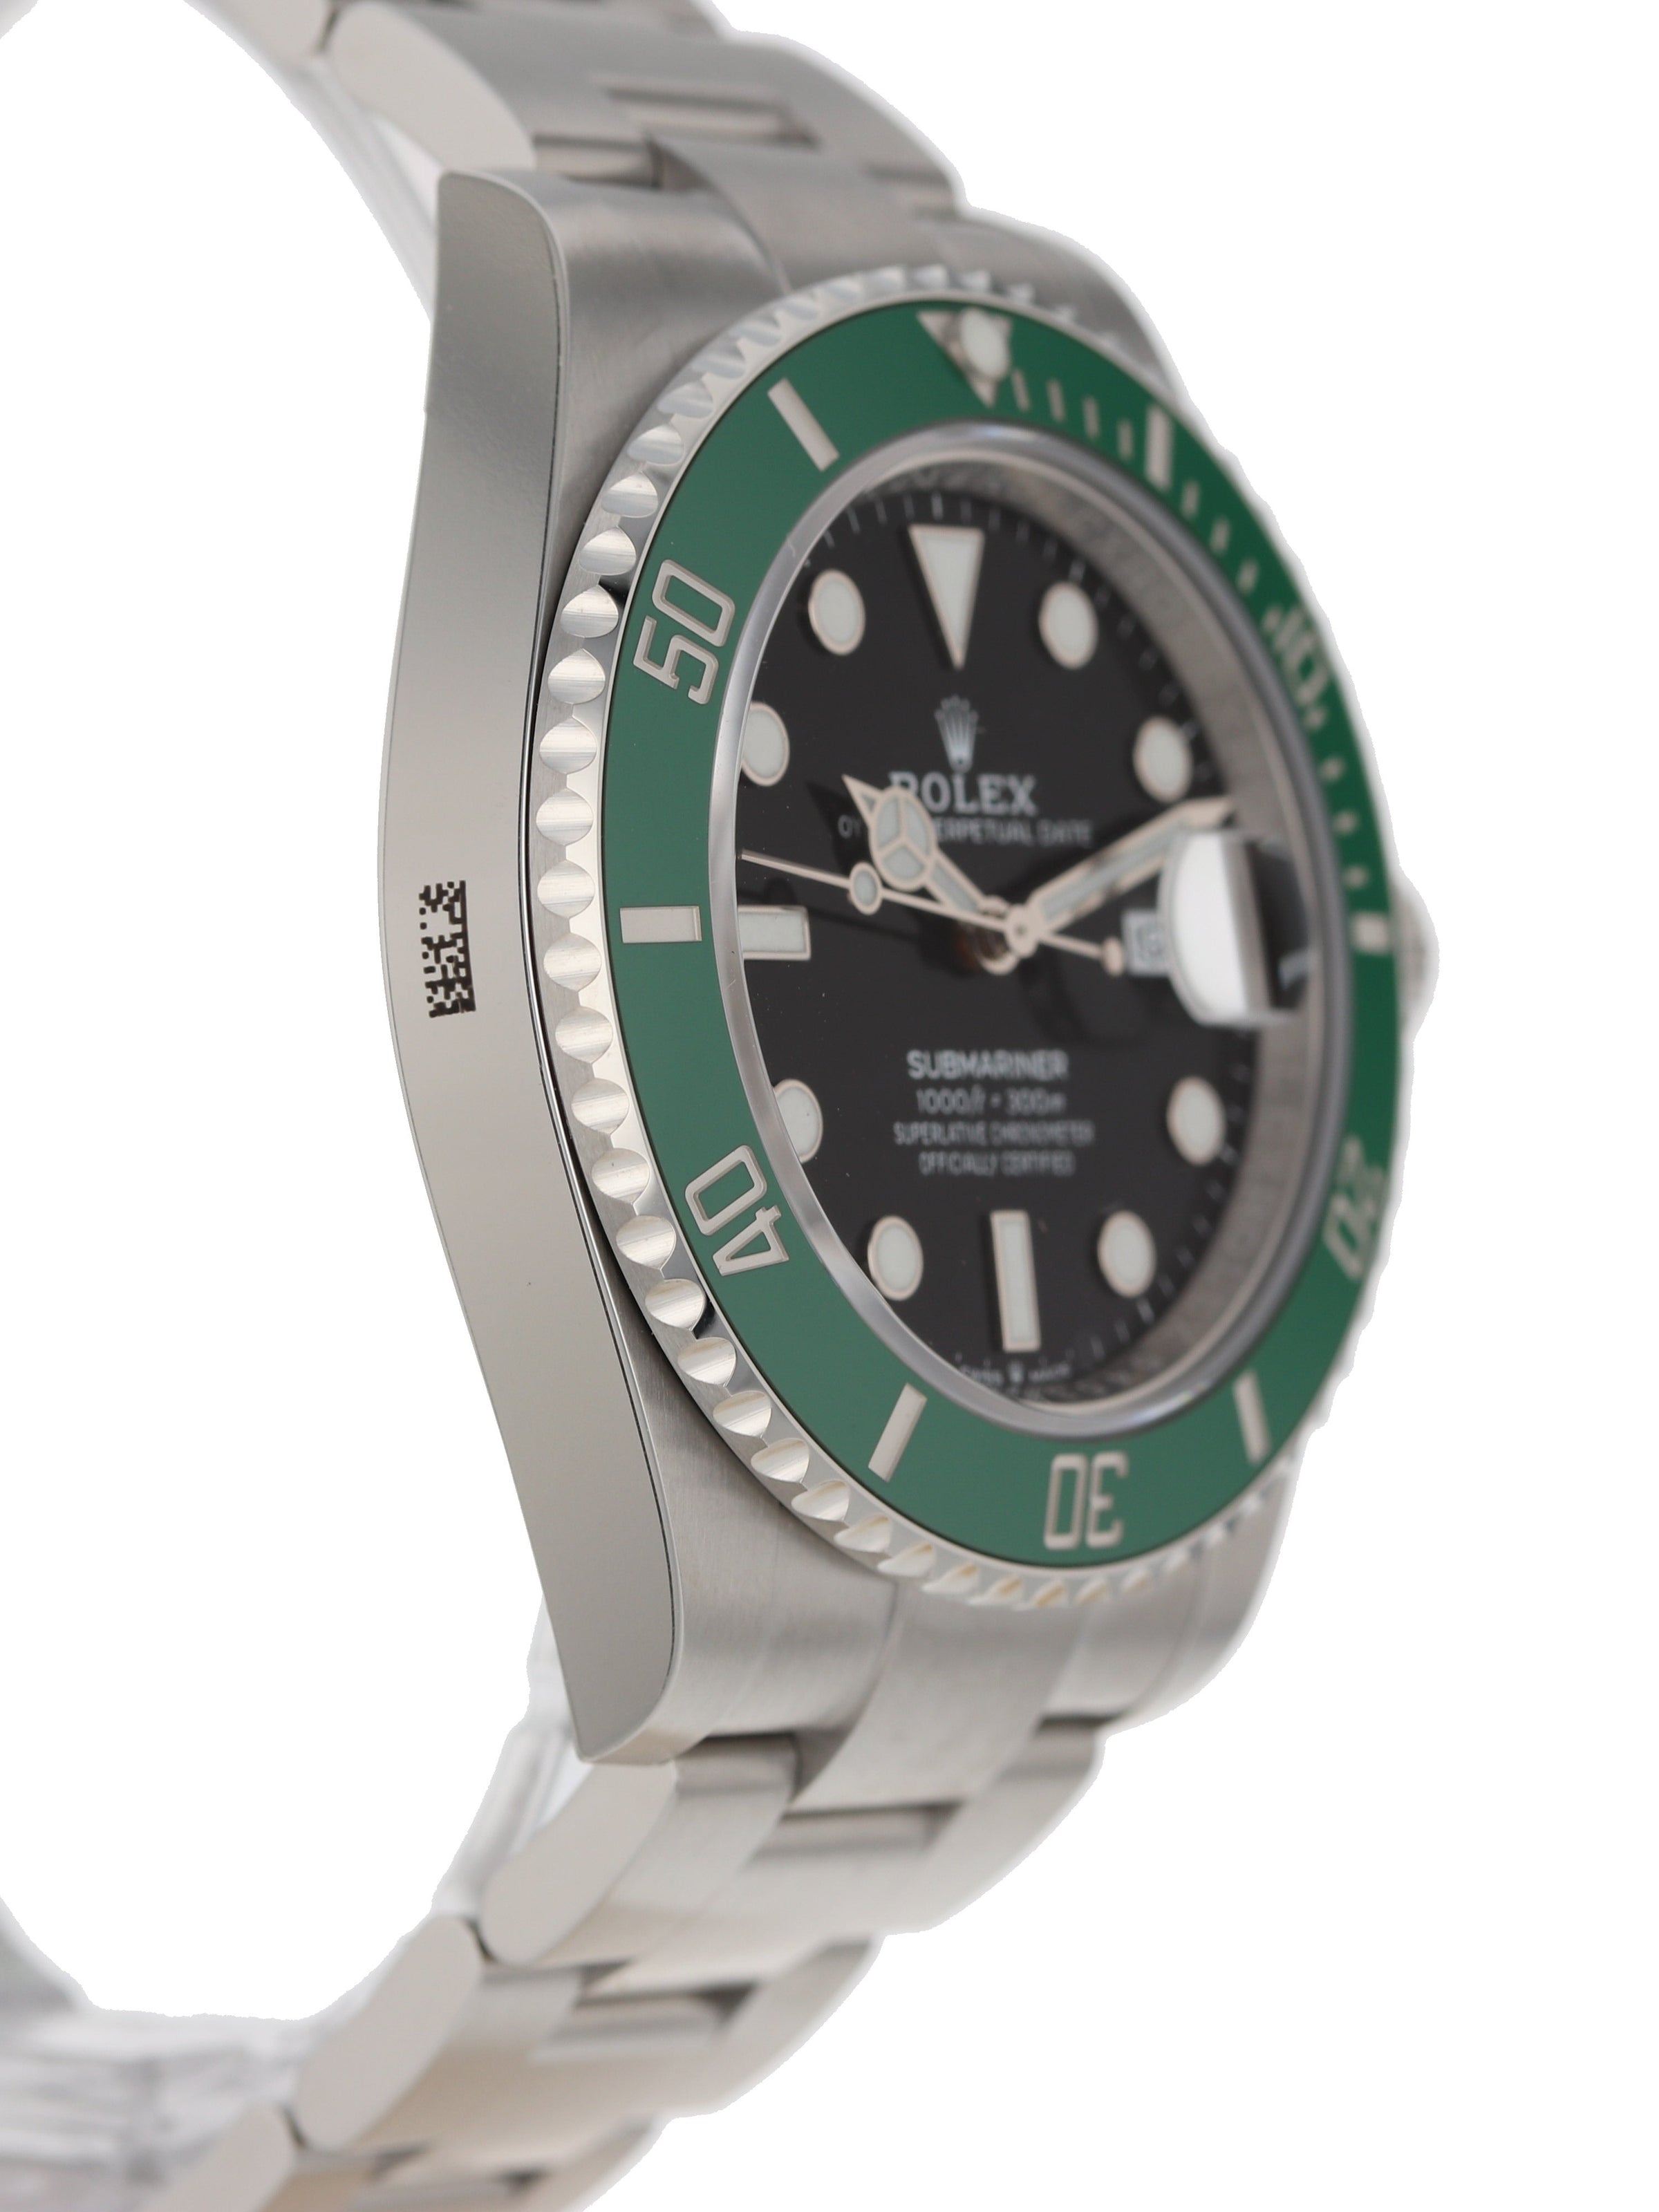 Rolex Submariner 126610 LV 41 mm- Unworn with Box and Papers December 2020  - Watches For Sale from Watch Buyers UK